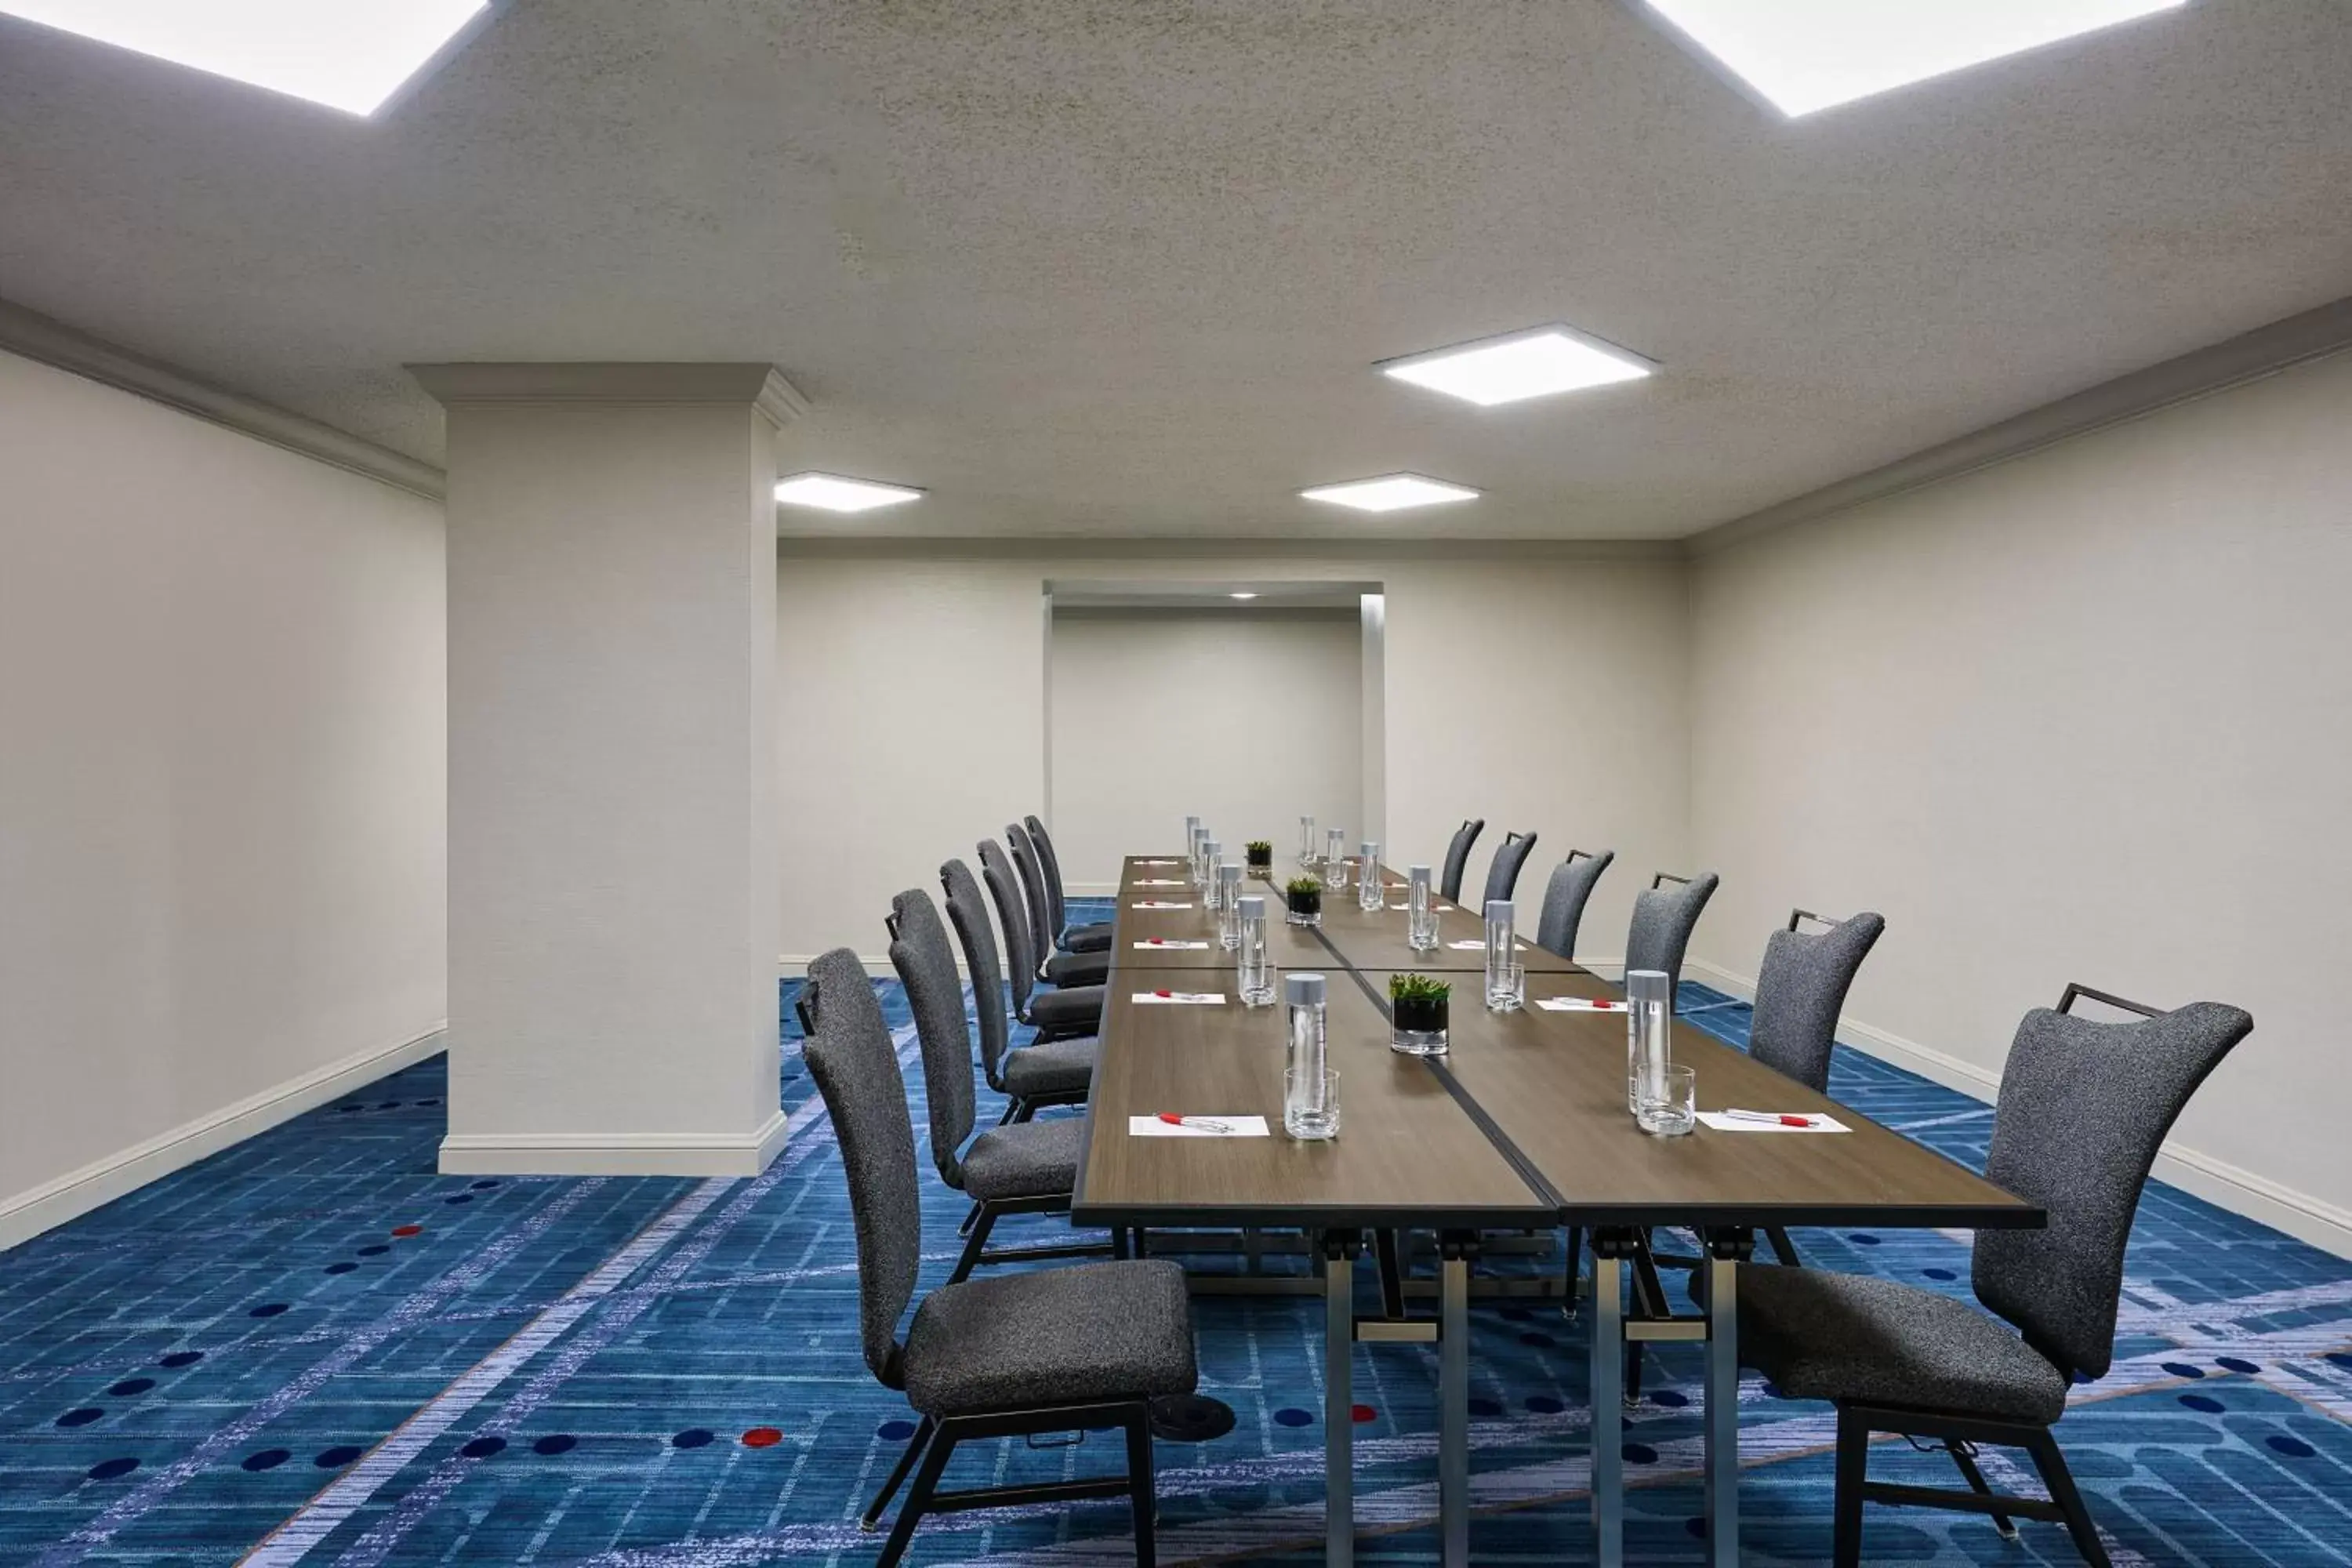 Meeting/conference room in Los Angeles Airport Marriott